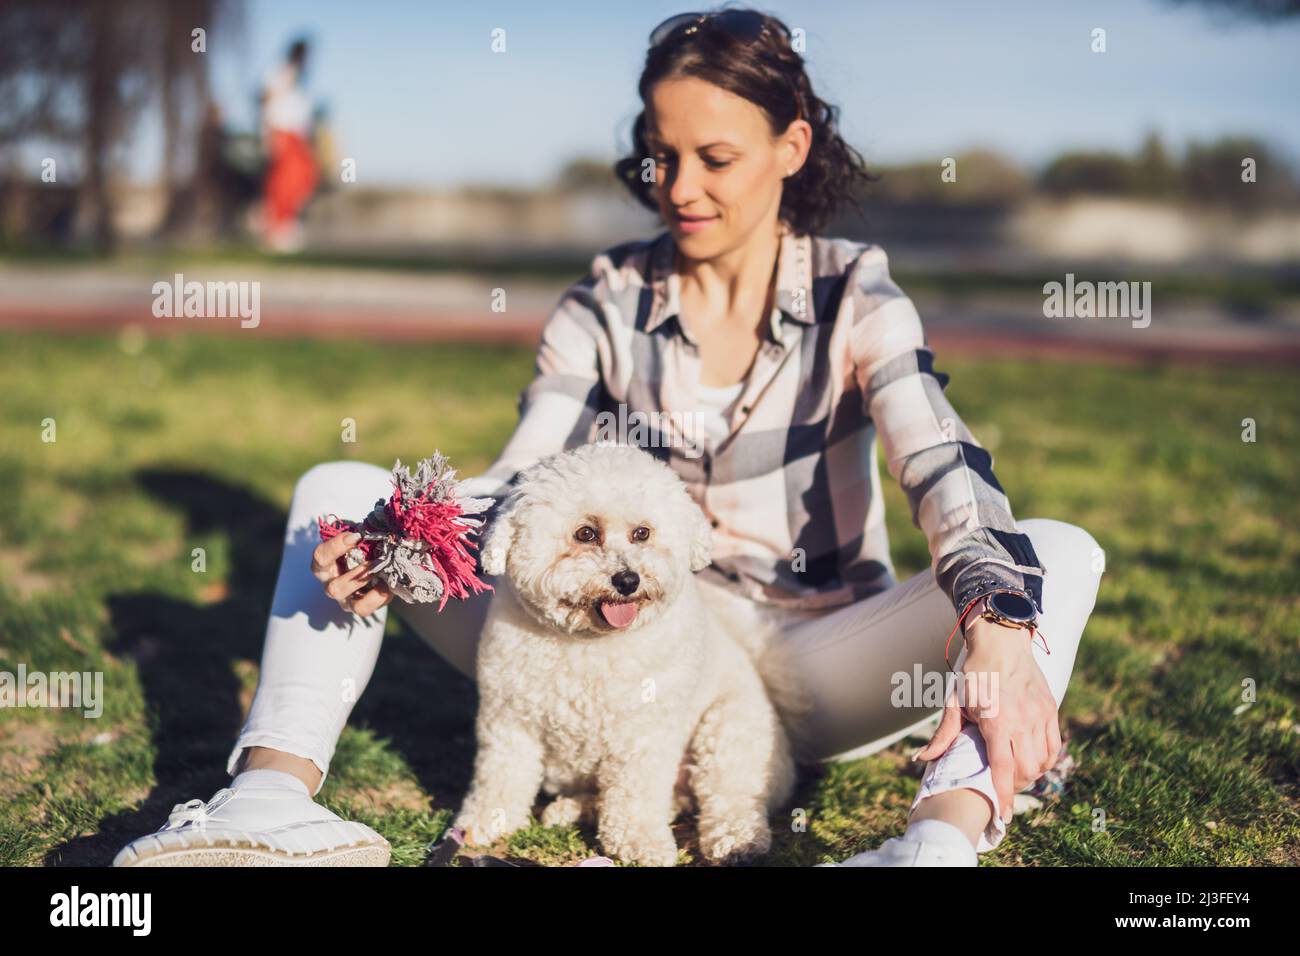 Happy woman is playing with her white bichon frise dog on sunny day in park. Stock Photo